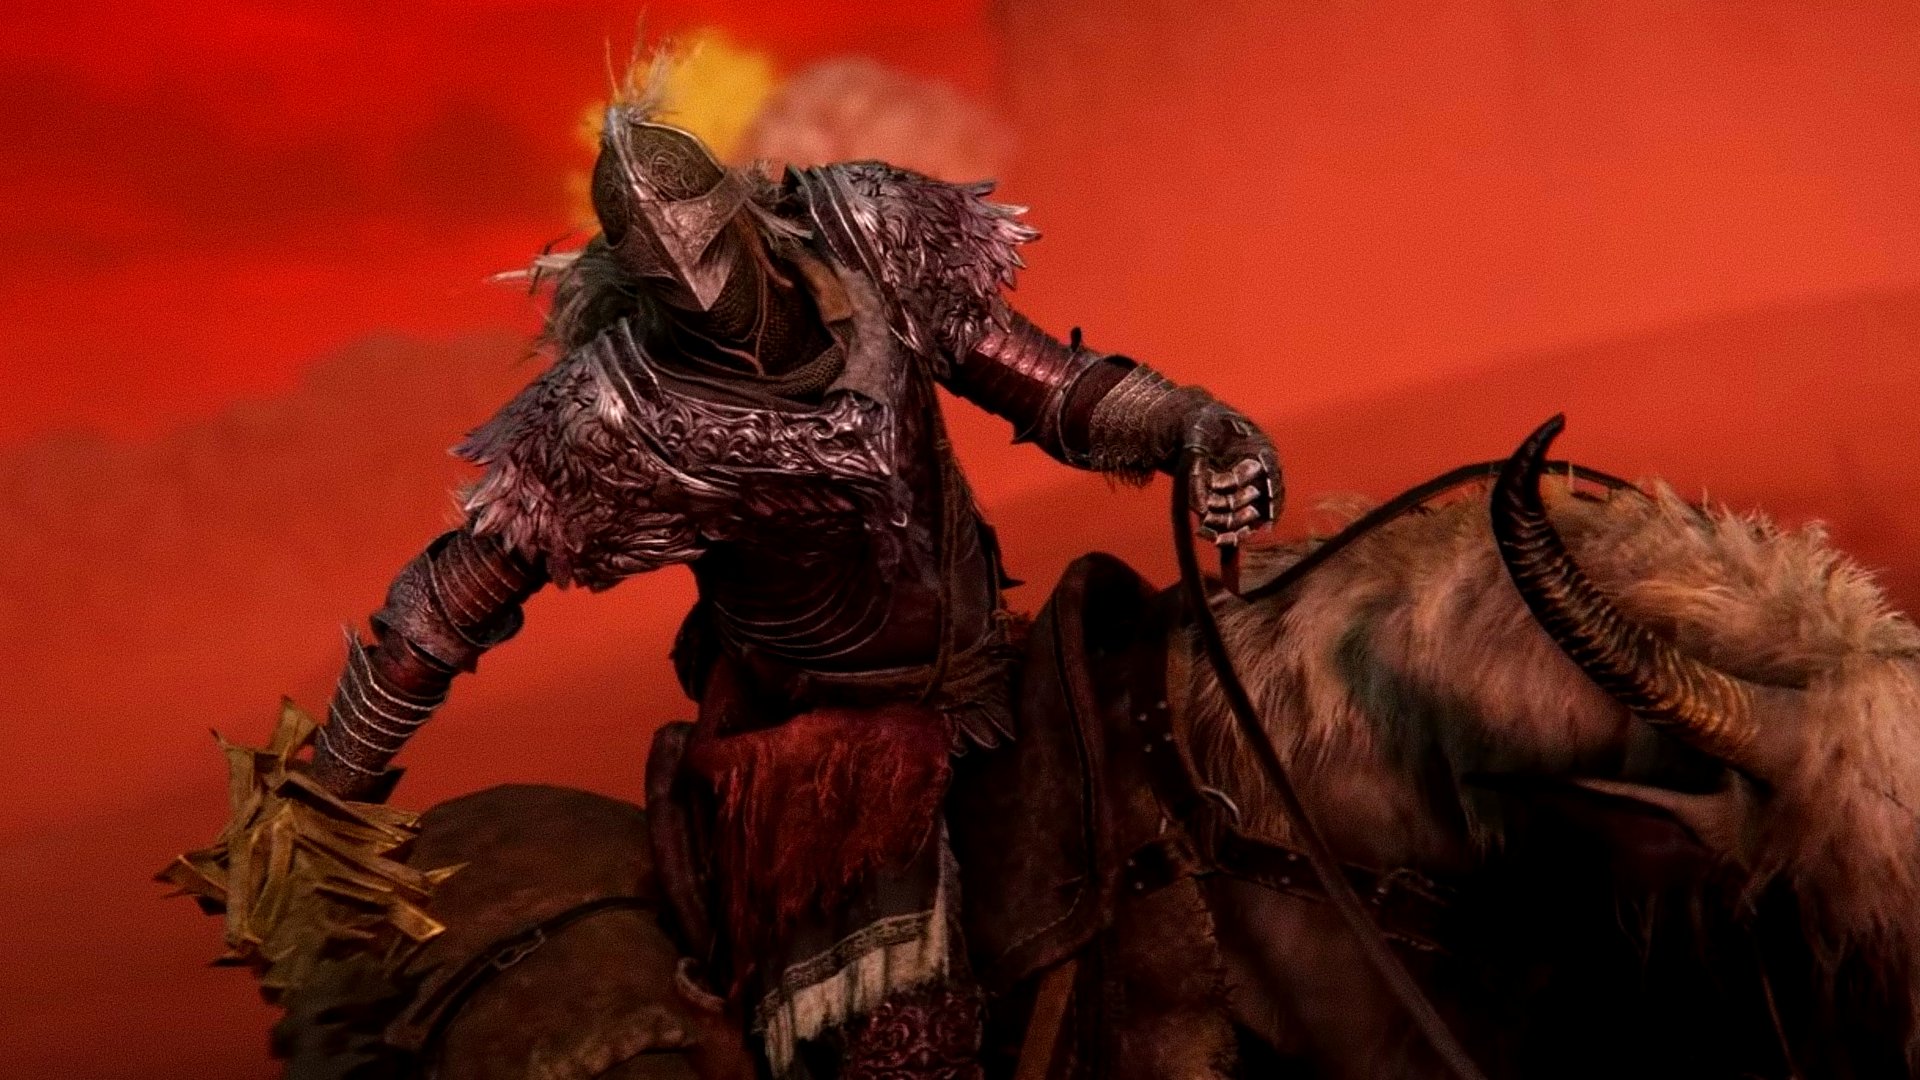 Elden Ring Stats Reveal What Bosses Killed Players The Most